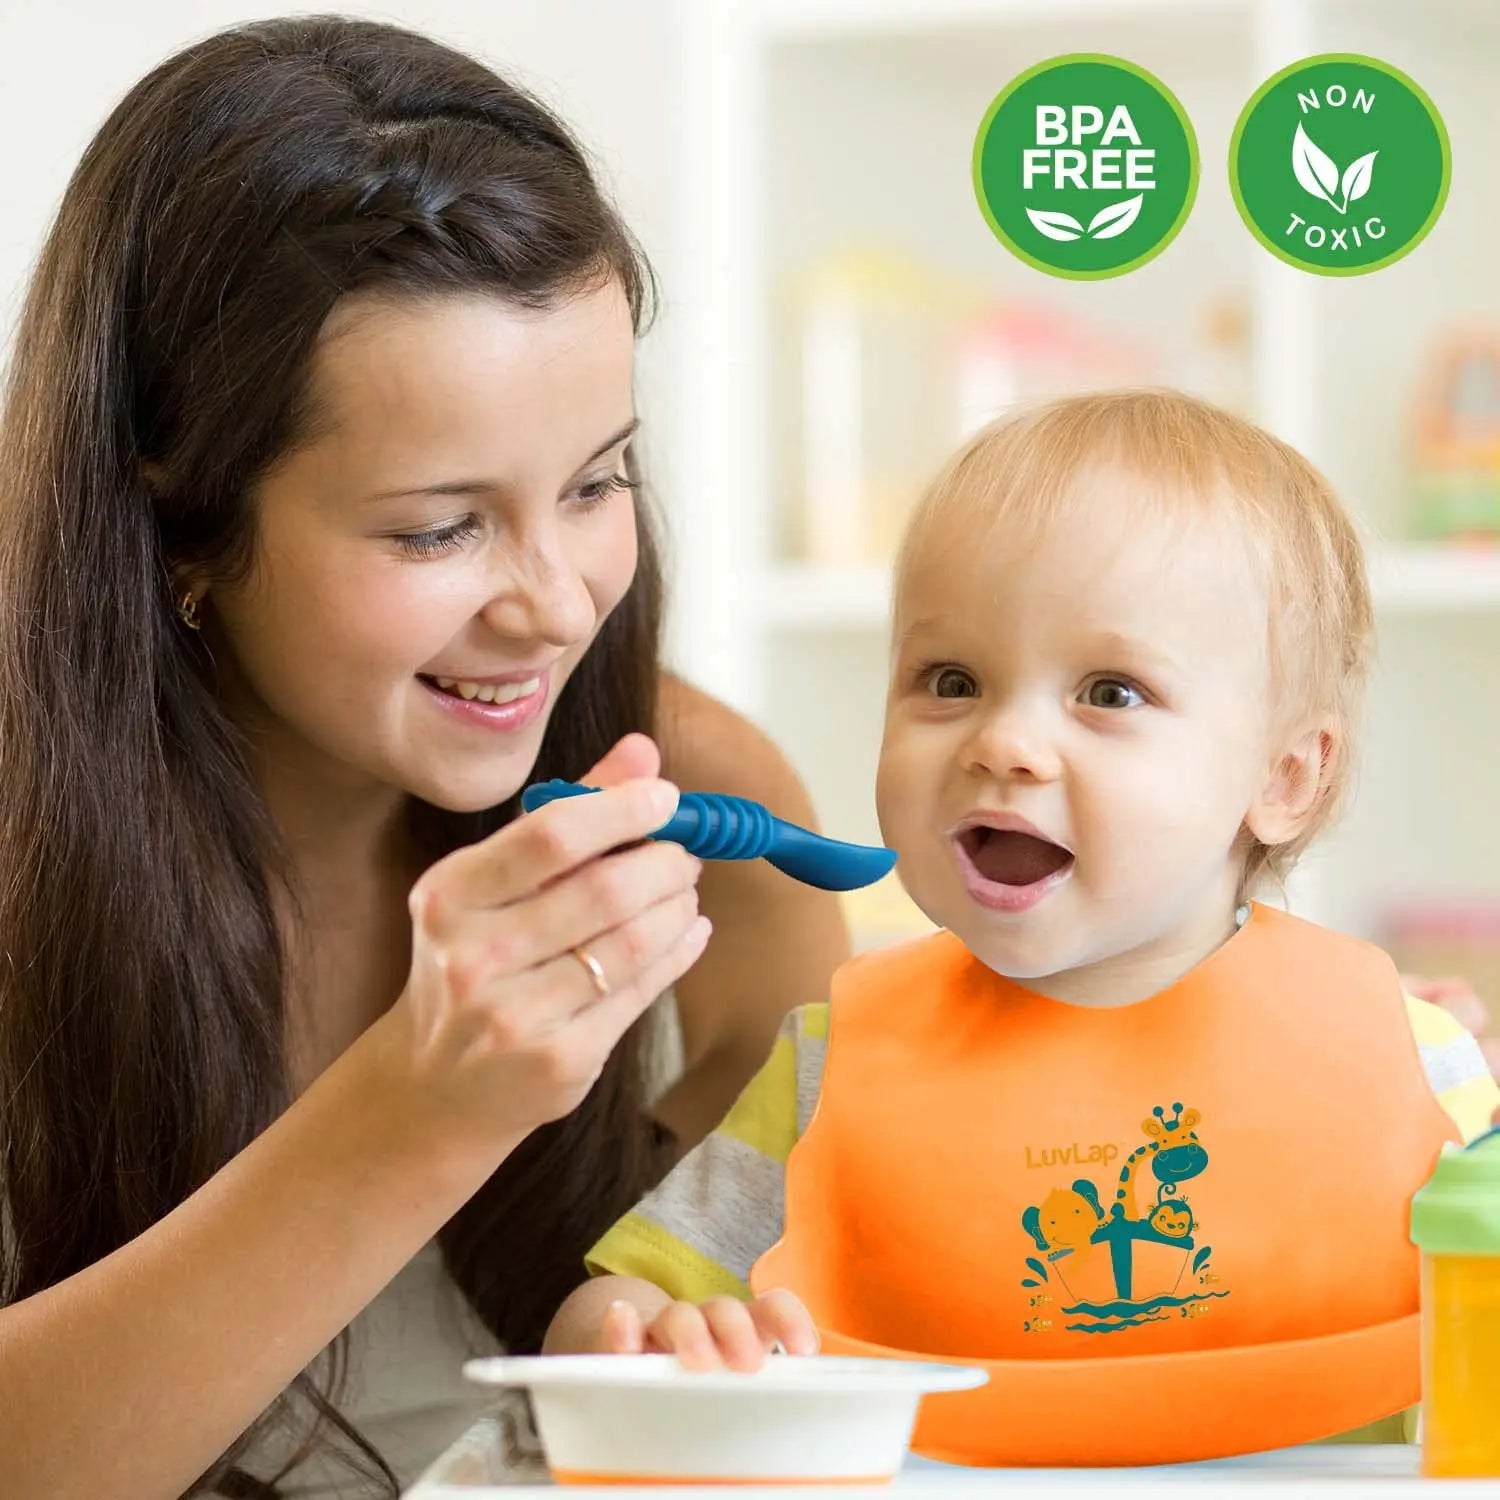 Chanak's Silicone Baby Led Weaning Spoons. Baby Traning Spoon, Gum Friendly,  BPA Free Aditi Toys Pvt. Ltd.